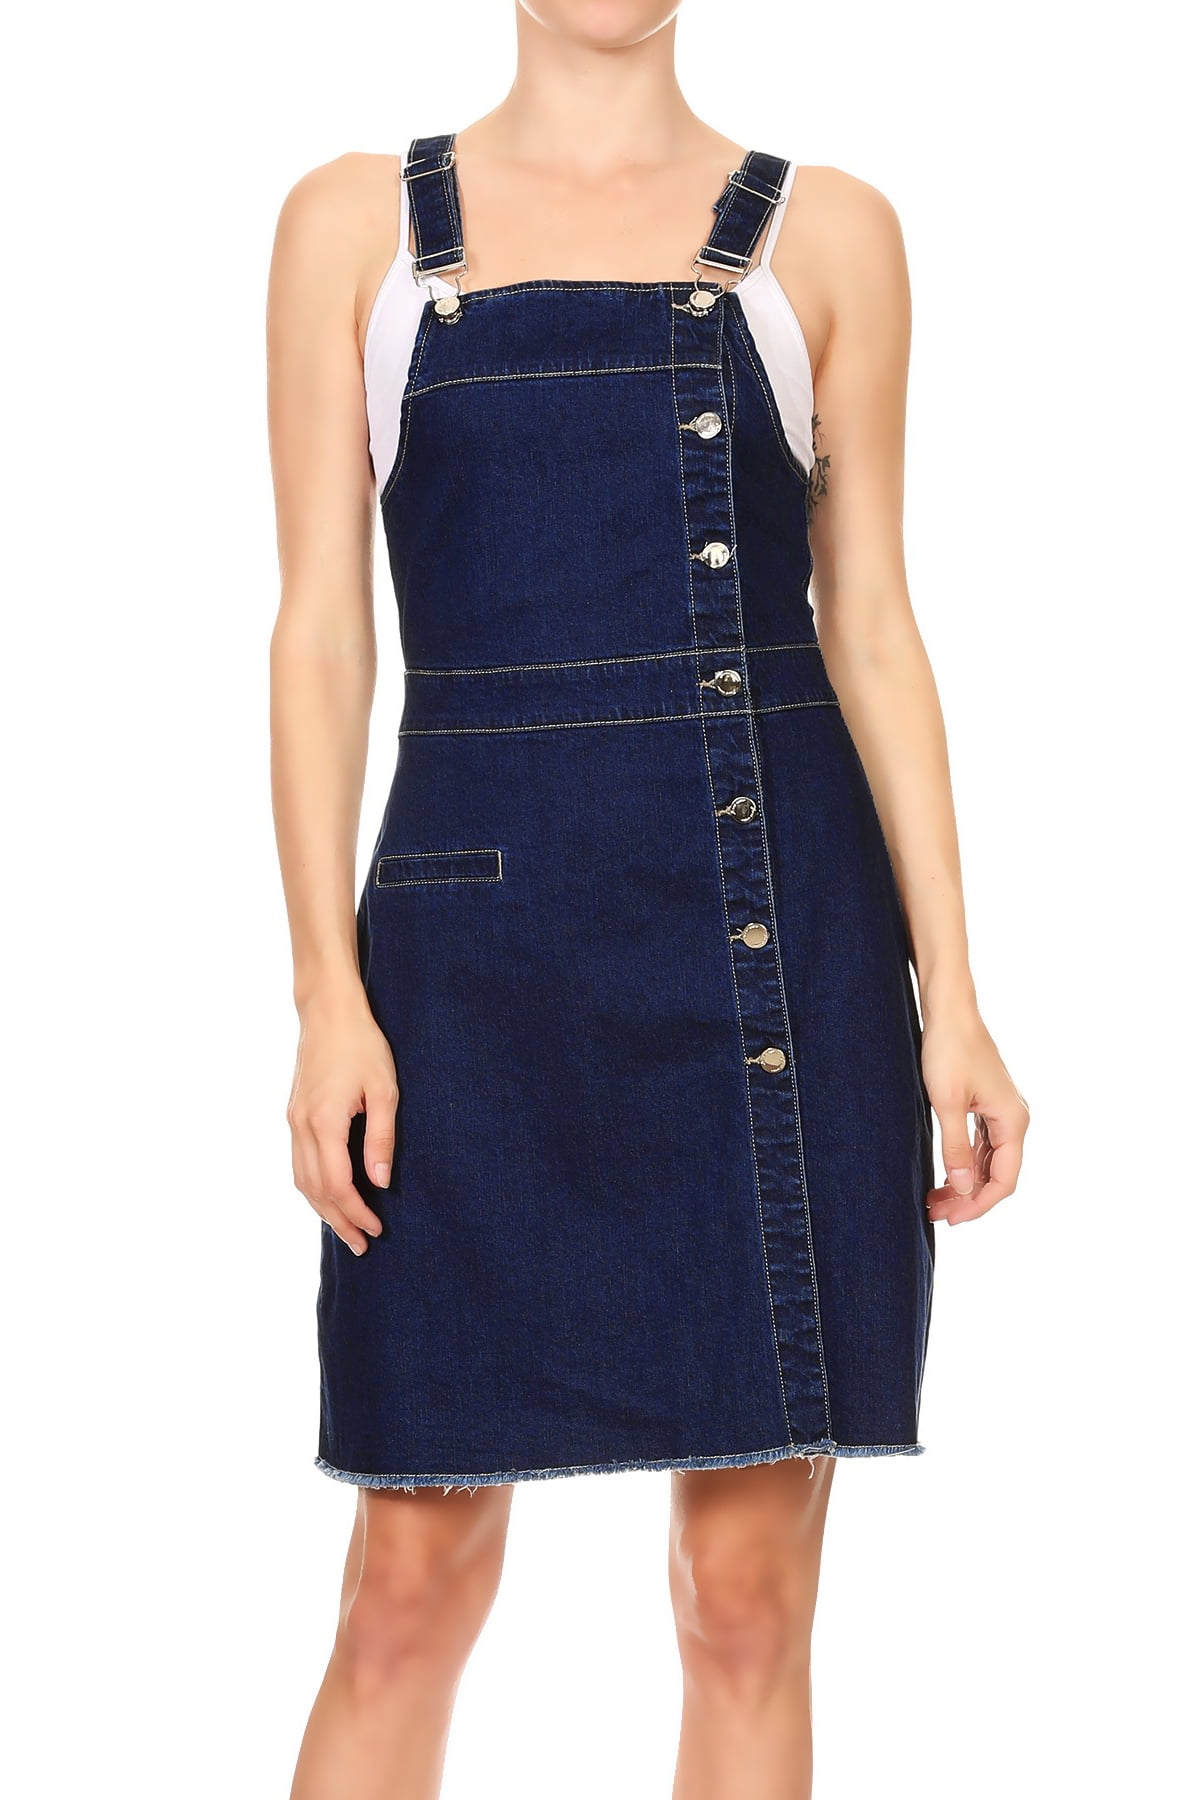 jean overall dress